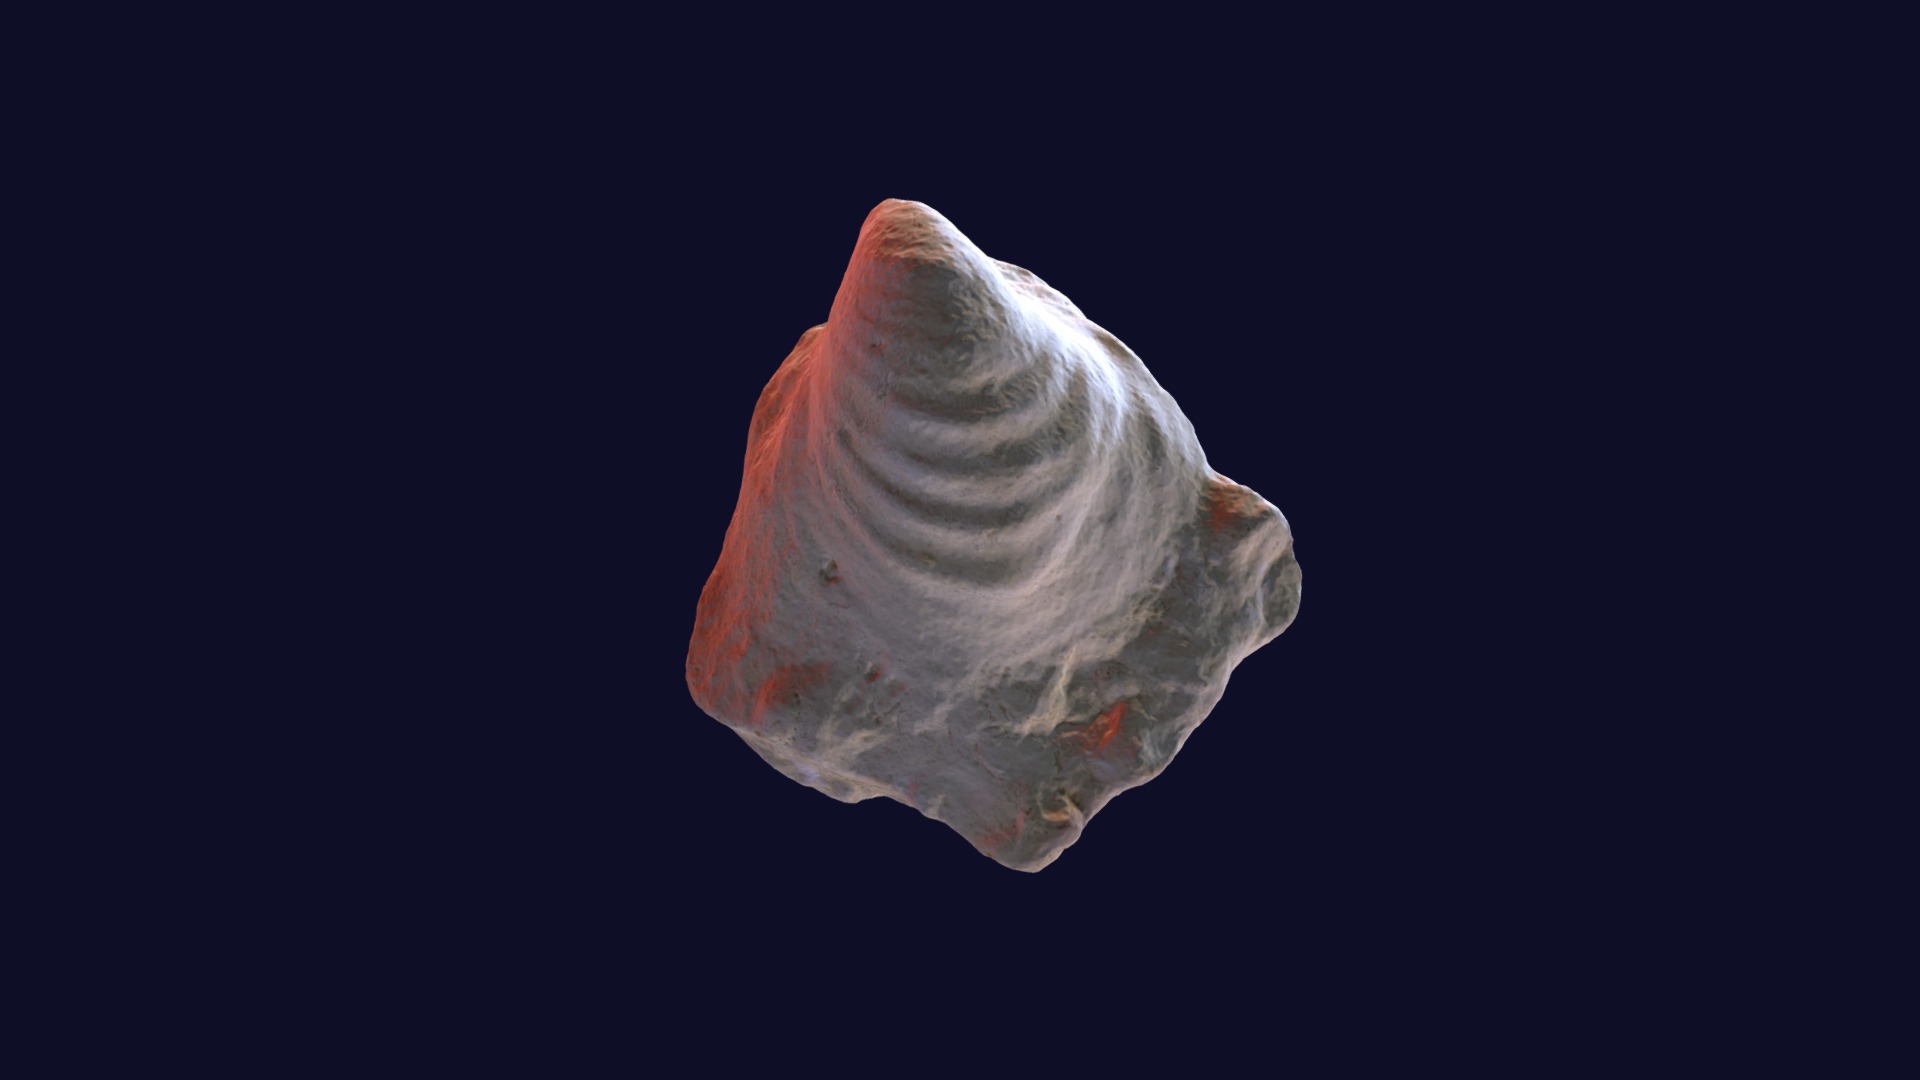 3D model Inoceramus stantoni 28951 Syntype - This is a 3D model of the Inoceramus stantoni 28951 Syntype. The 3D model is about a close-up of a jellyfish.